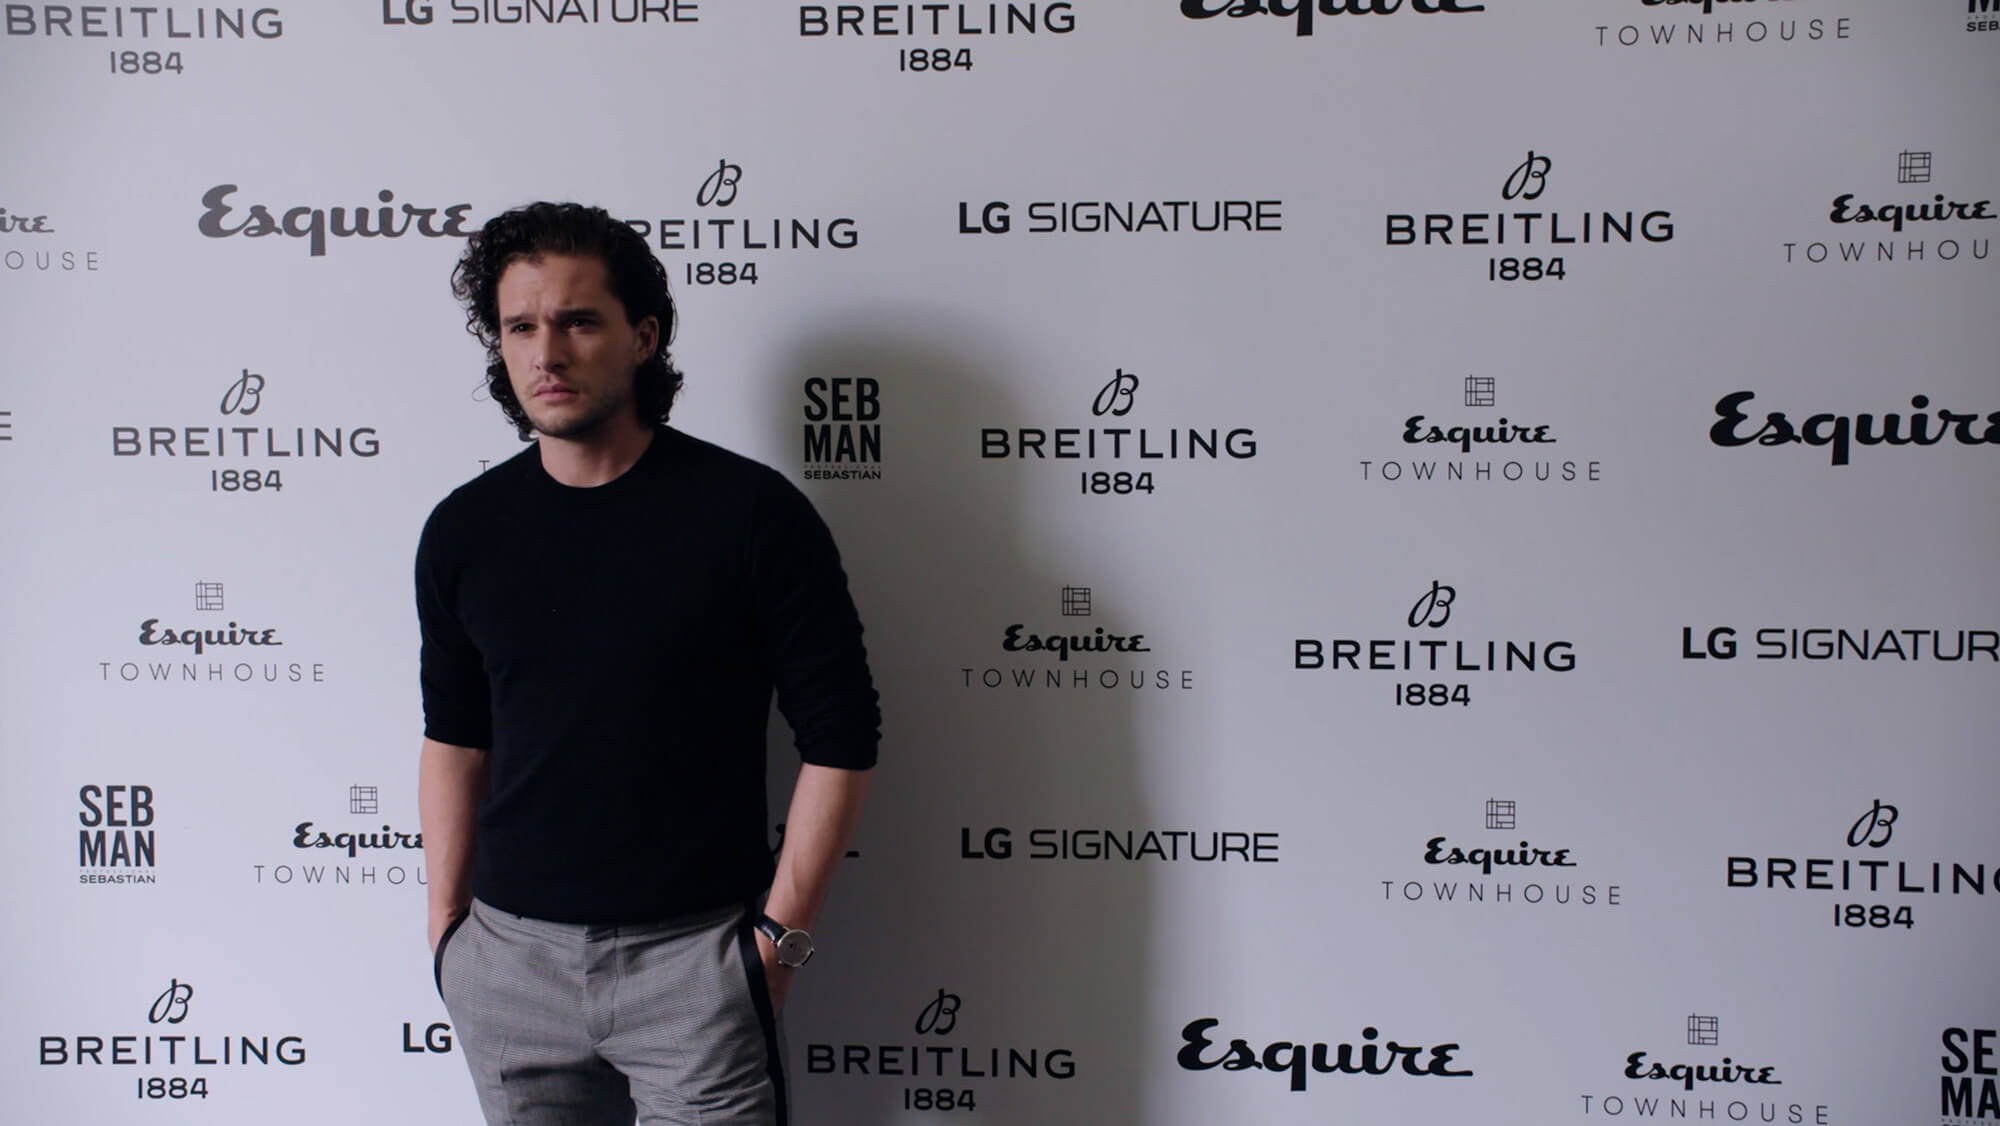 A shot of Kit Harington at the Esquire Townhouse event, from the Rise Media case studies archive